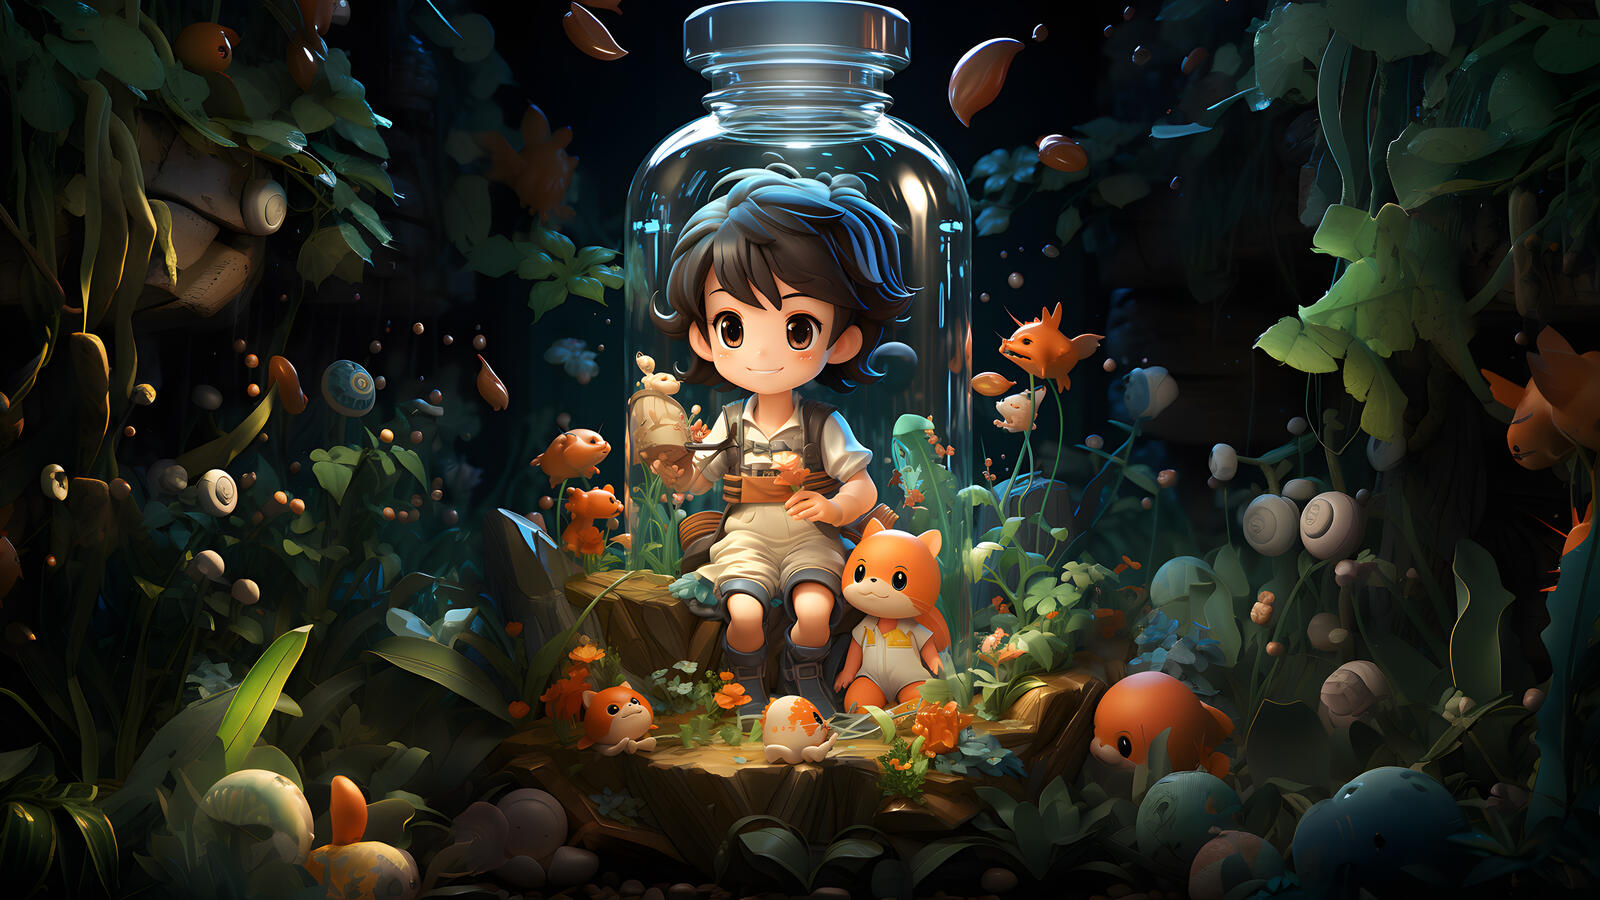 Free photo Rendering picture of a boy in a jar underwater watching the fish